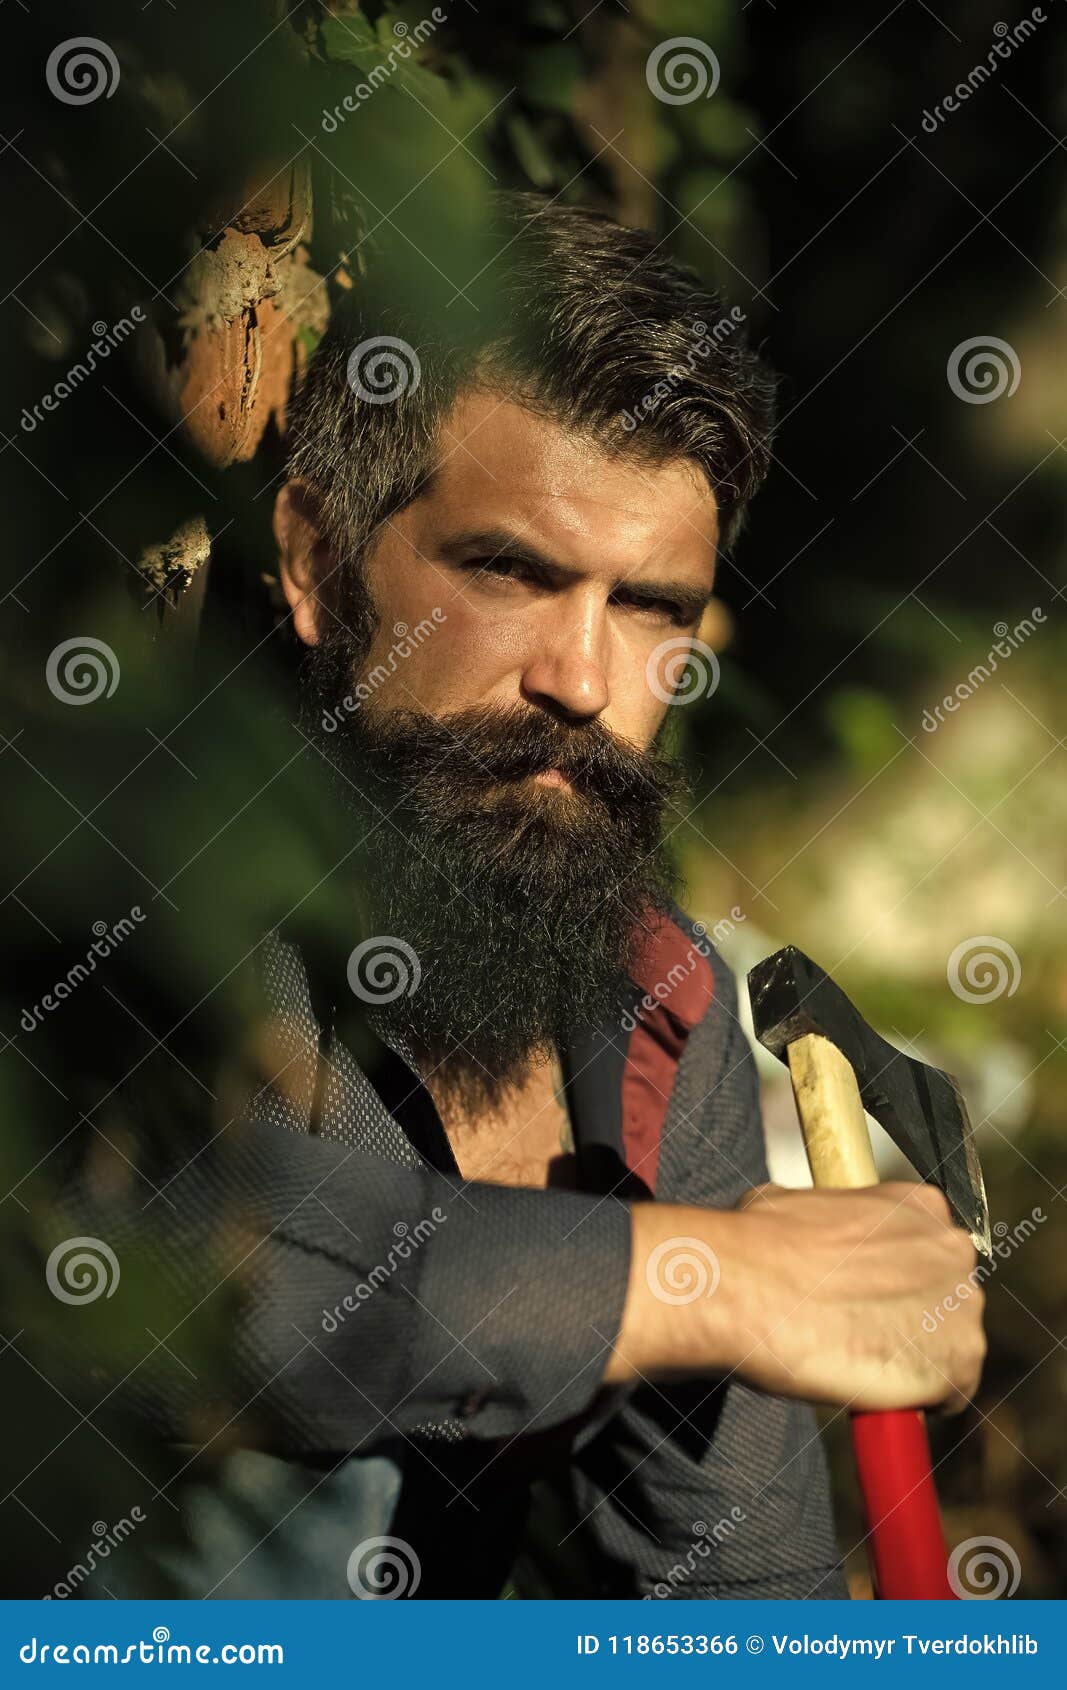 Brutal Man with an Ax. Man Holding Ax Near Wall Stock Photo - Image of ...